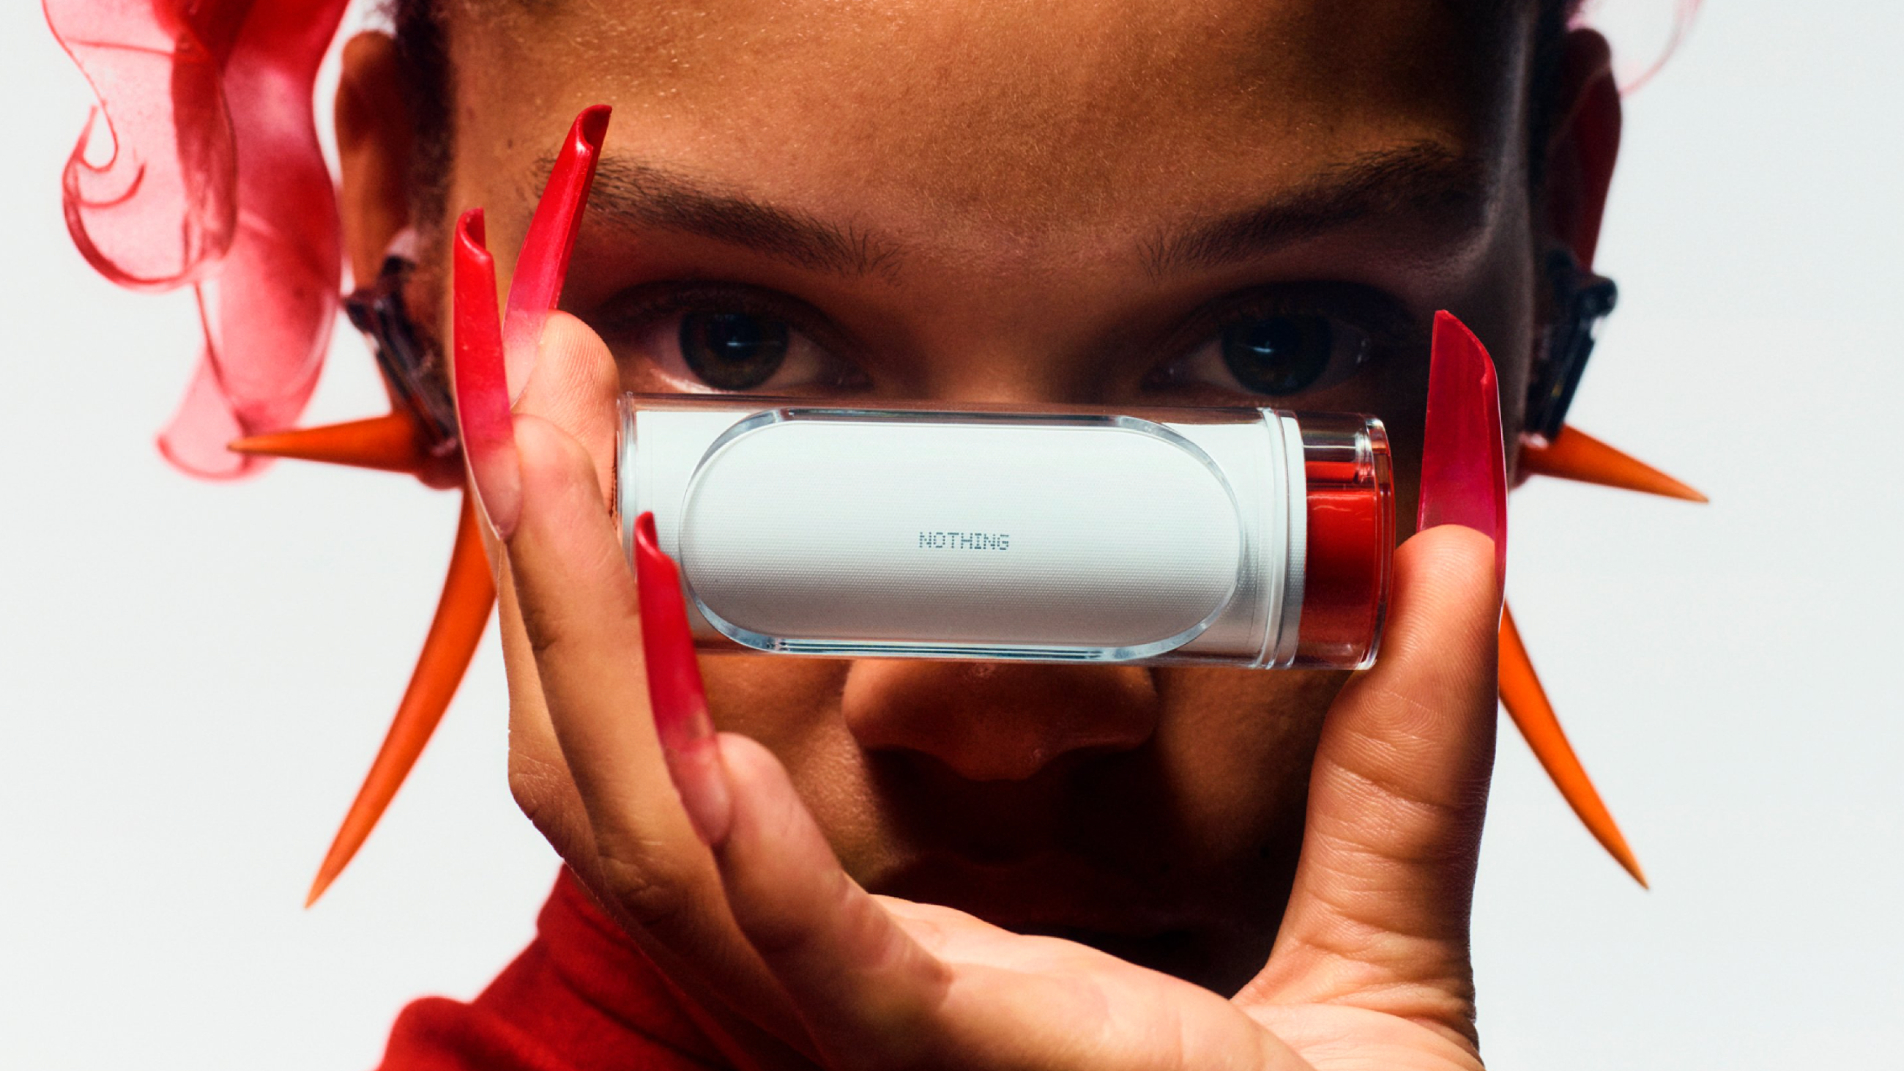 Nothing Ear (stick) earbuds case, held in front of a model's face